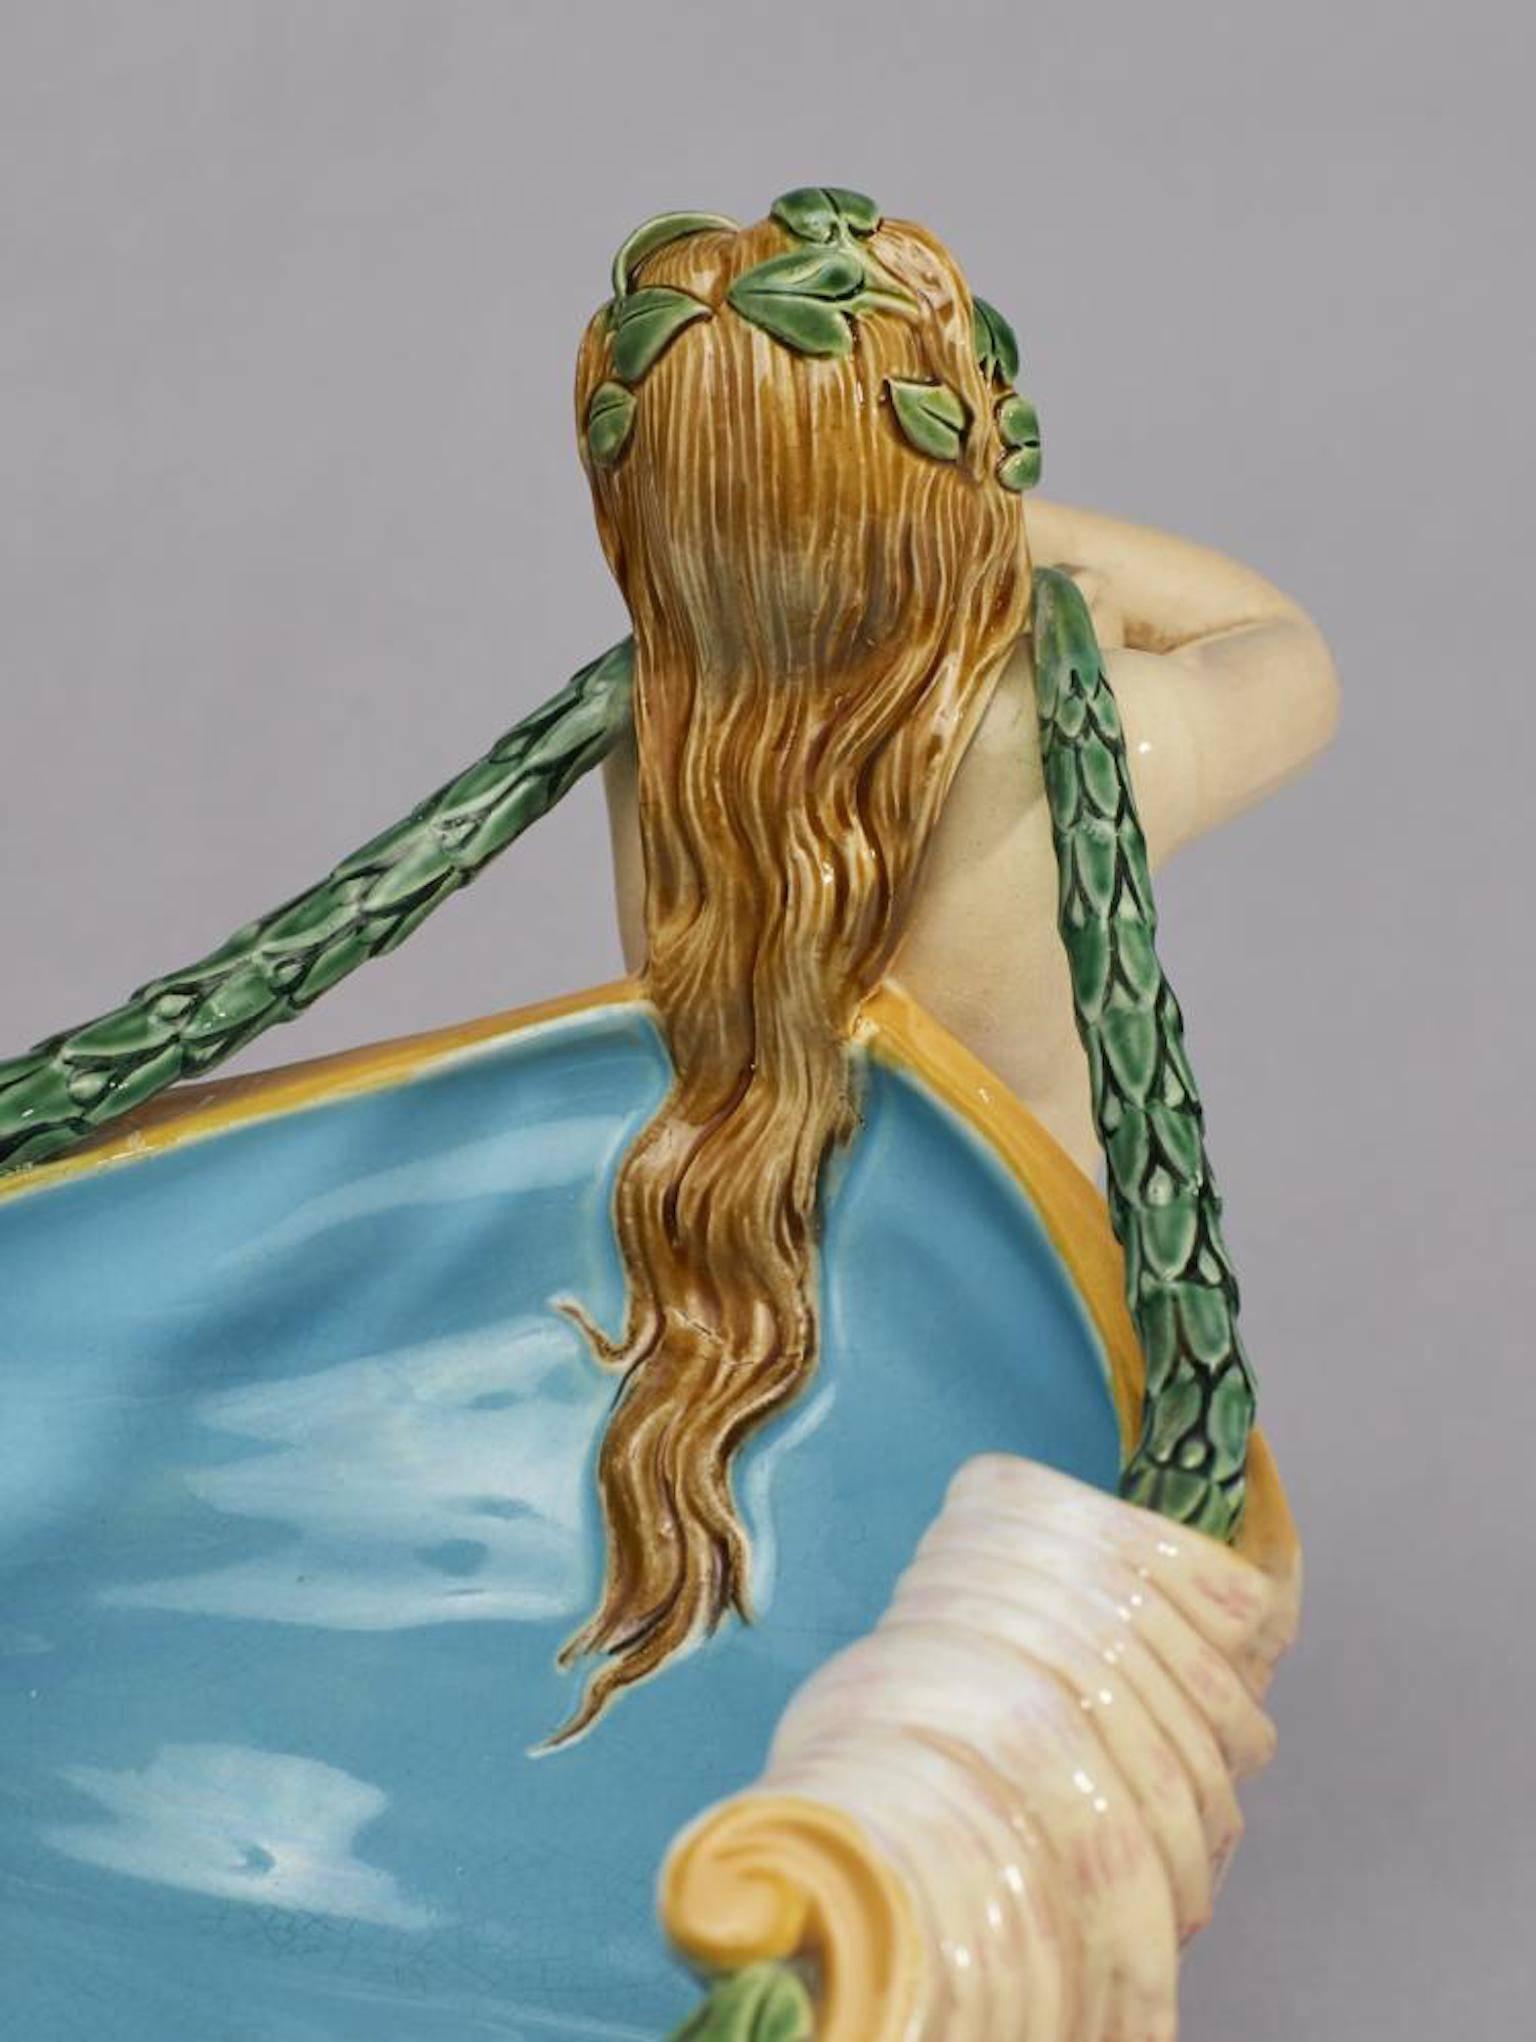 19th Century Minton Majolica Shell Form Mermaid Centerpiece In Excellent Condition For Sale In Washington Crossing, PA